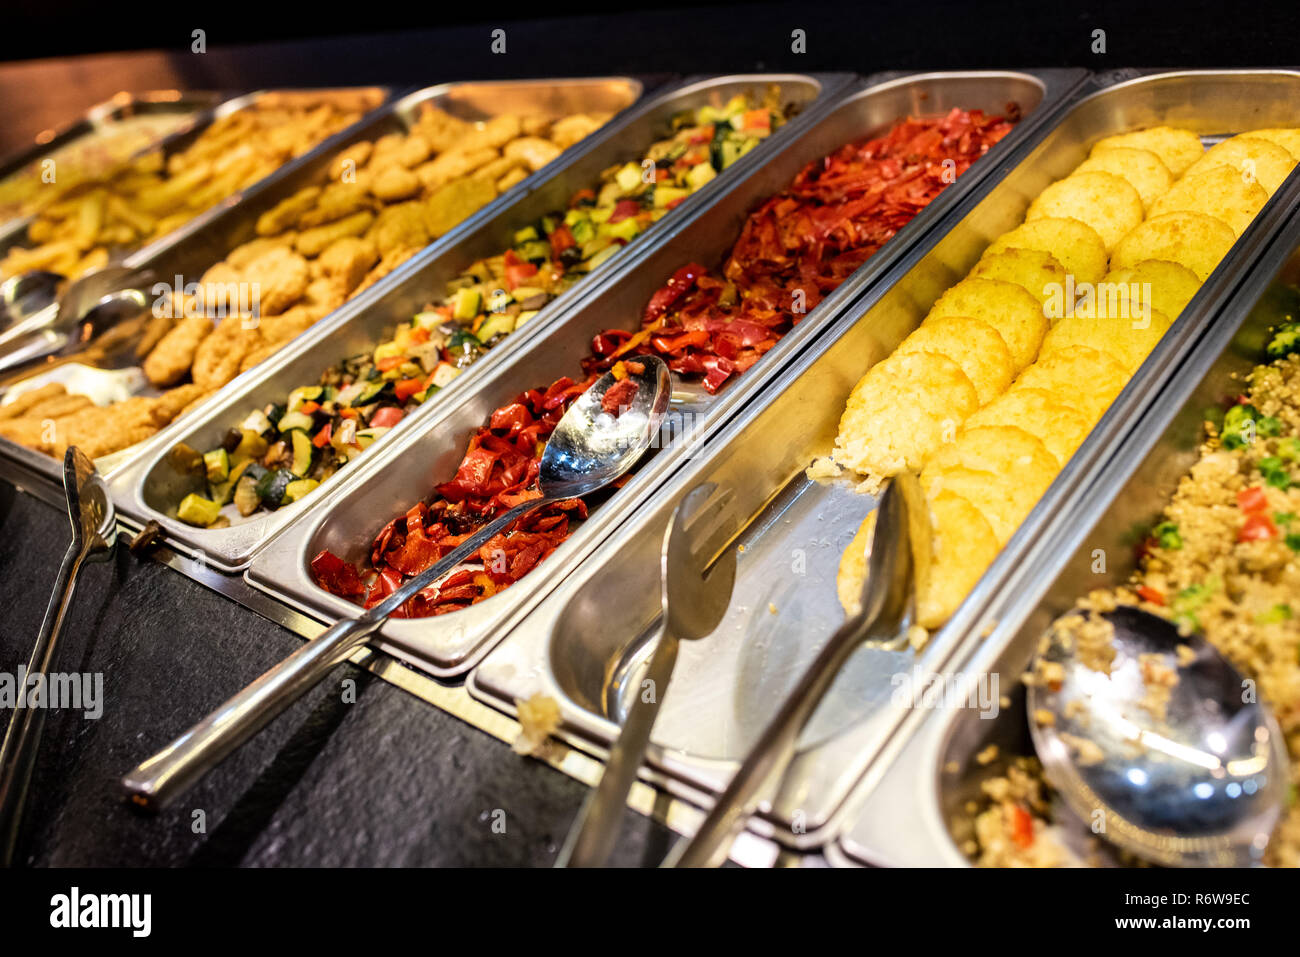 Trays with food for self-service buffet in a restaurant. Stock Photo